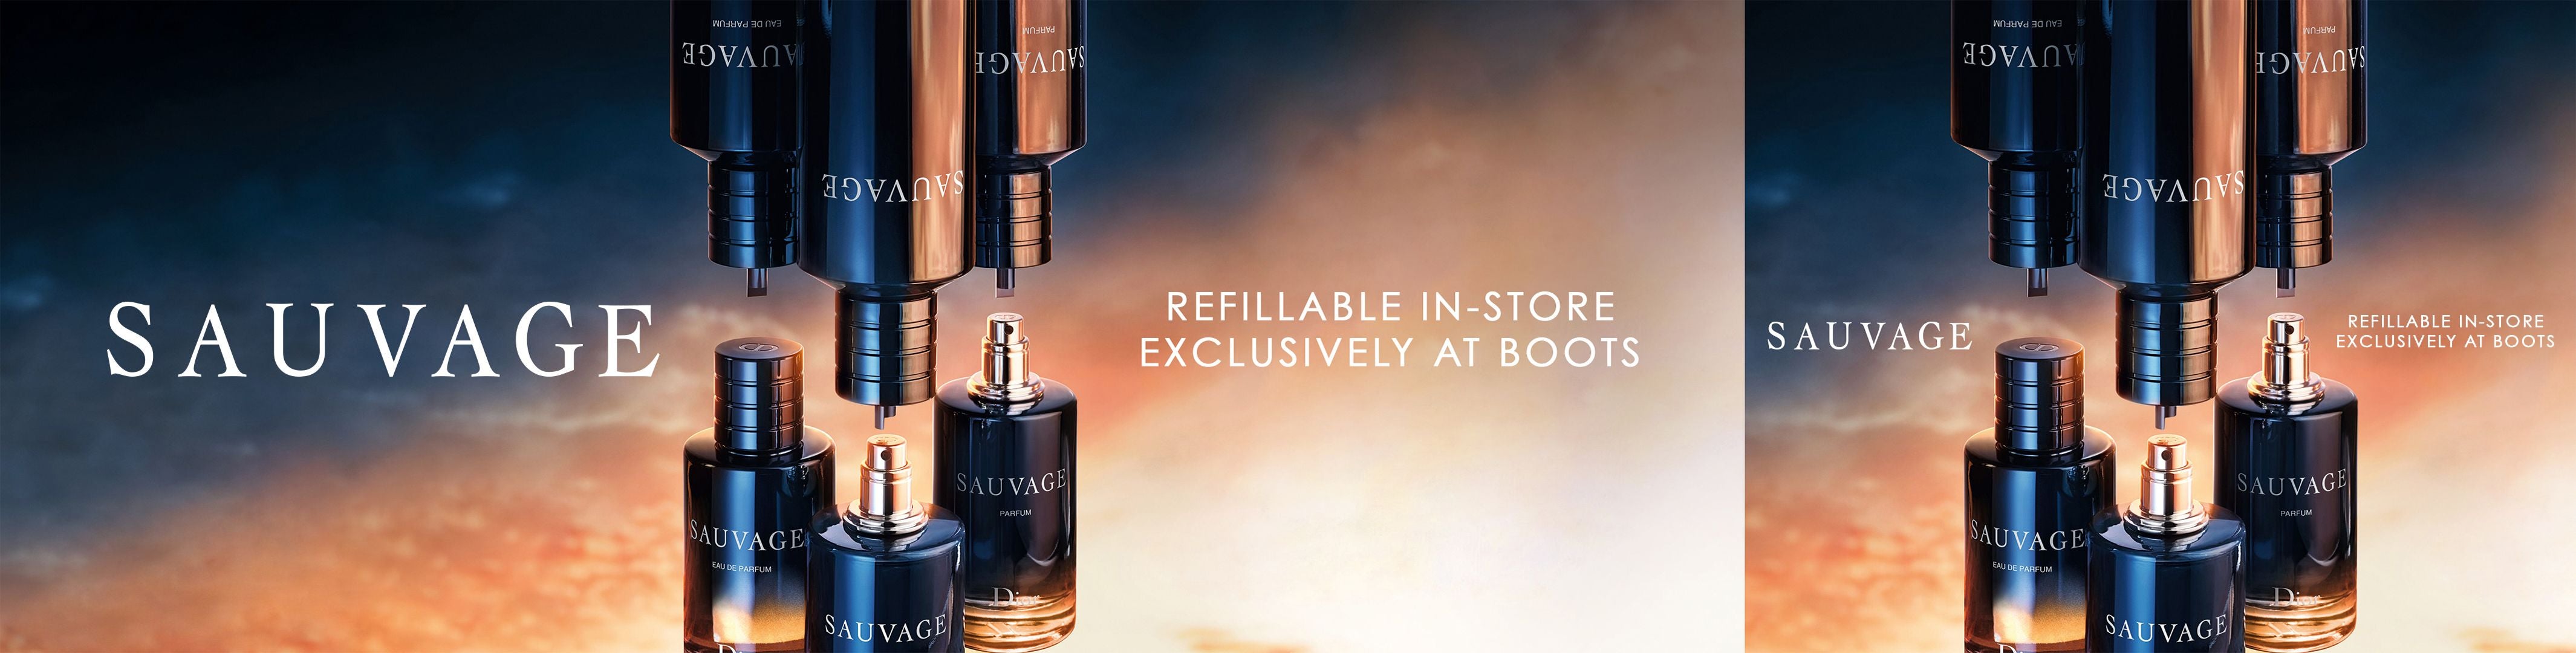 Sauvage Parfum Refillable Citrus and Woody Fragrance  DIOR